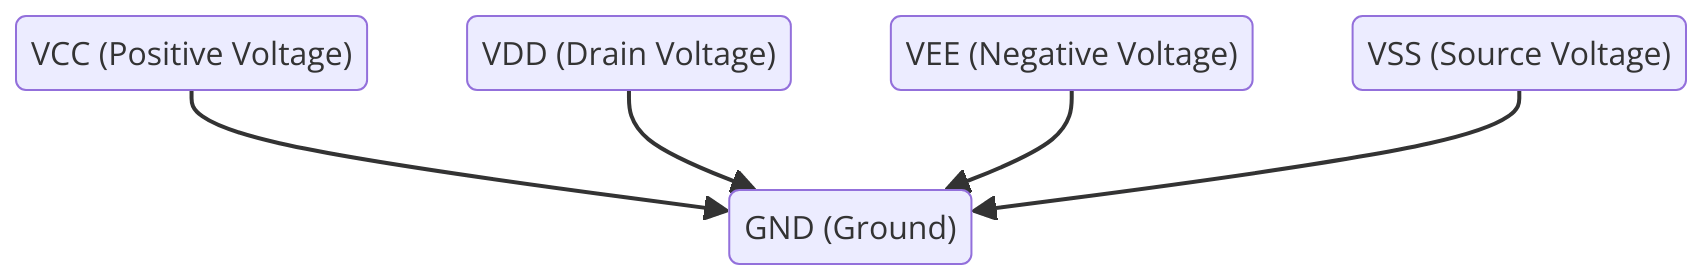  Relationship between VCC, VDD, VEE, VSS, and GND